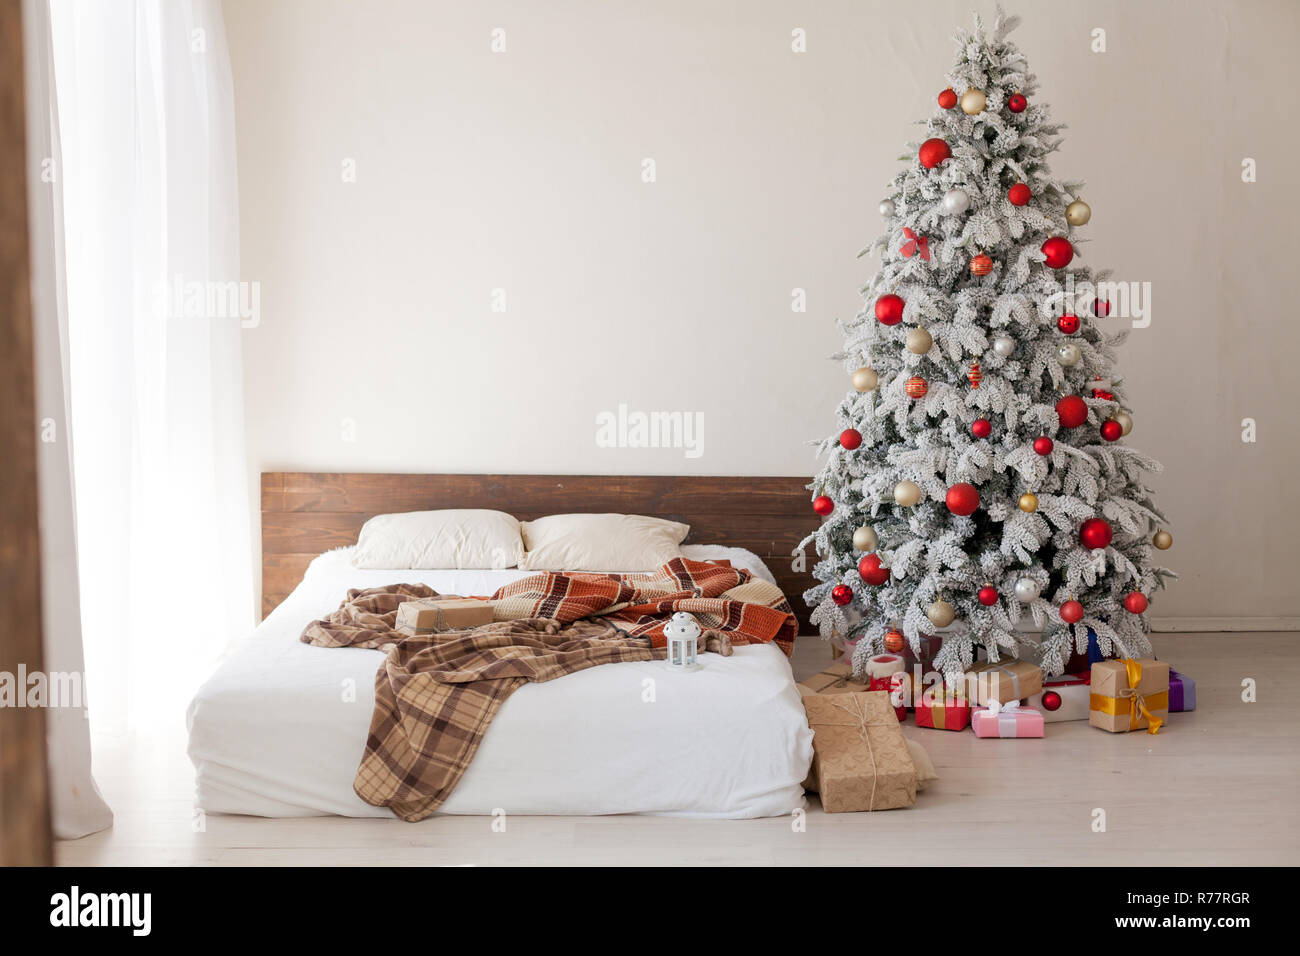 Cozy bed with Christmas pillows decorated with Christmas decor Stock Photo  - Alamy